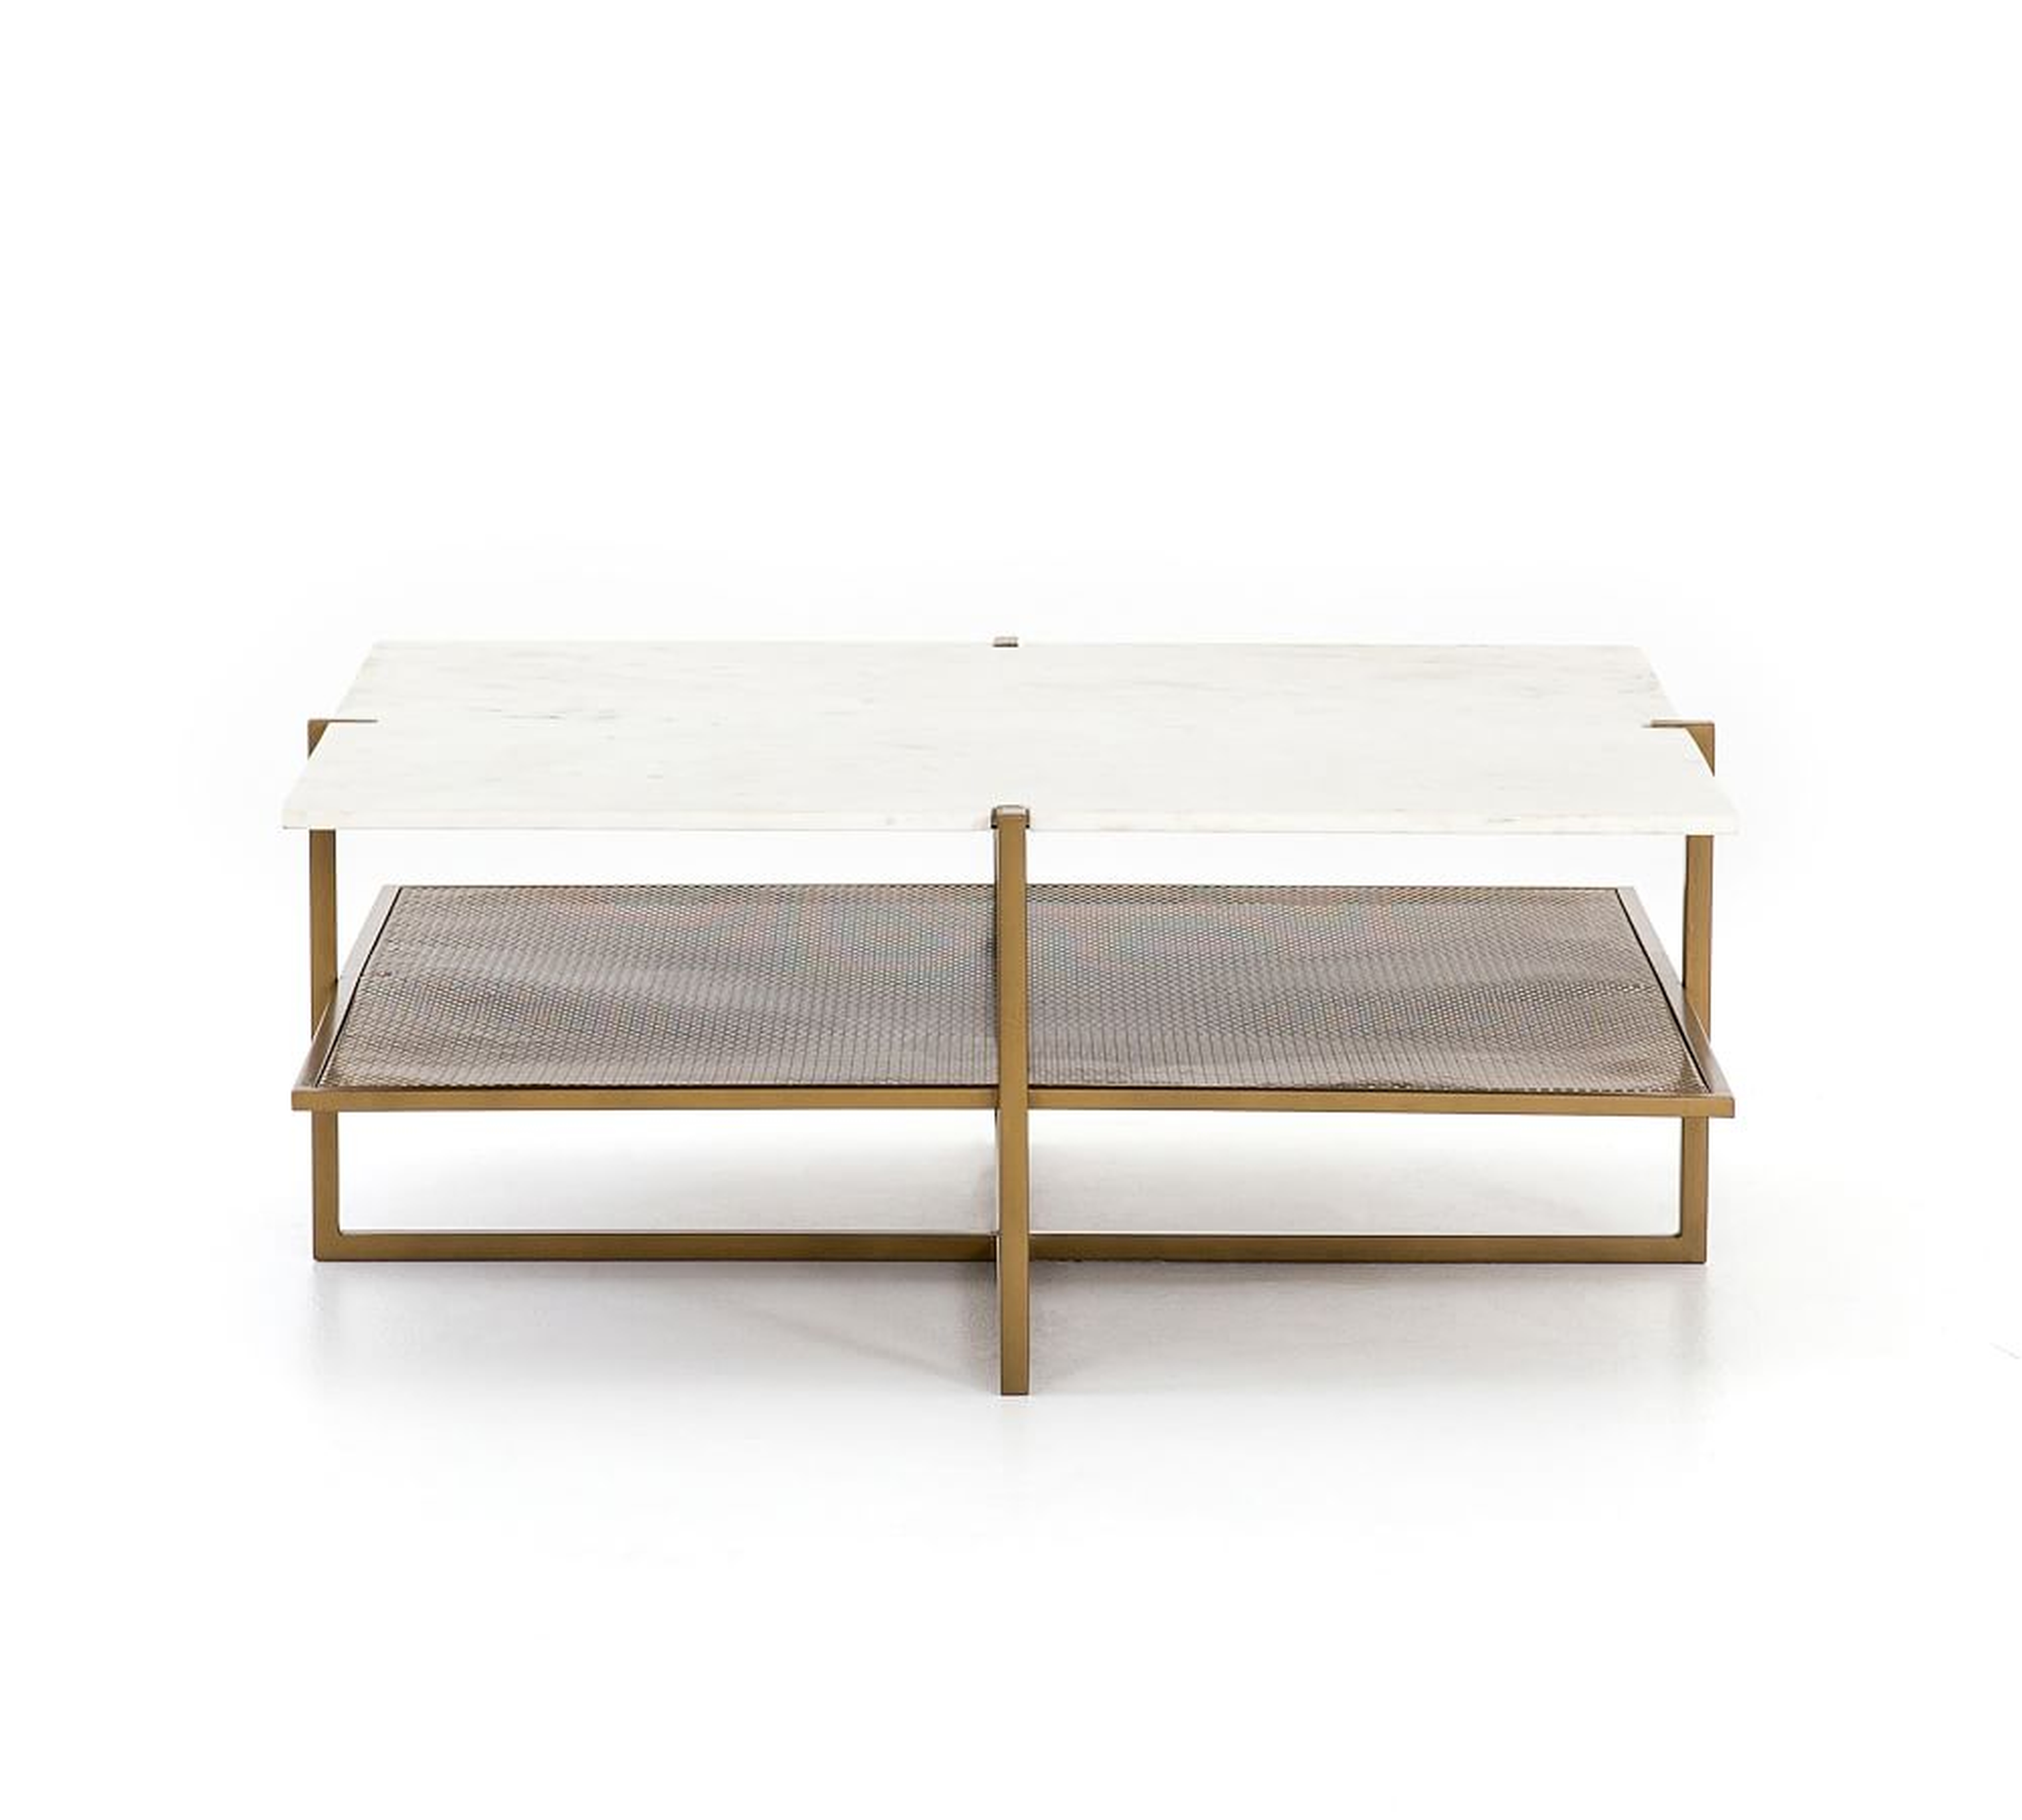 Hyla Marble Coffee Table, Brass - Pottery Barn